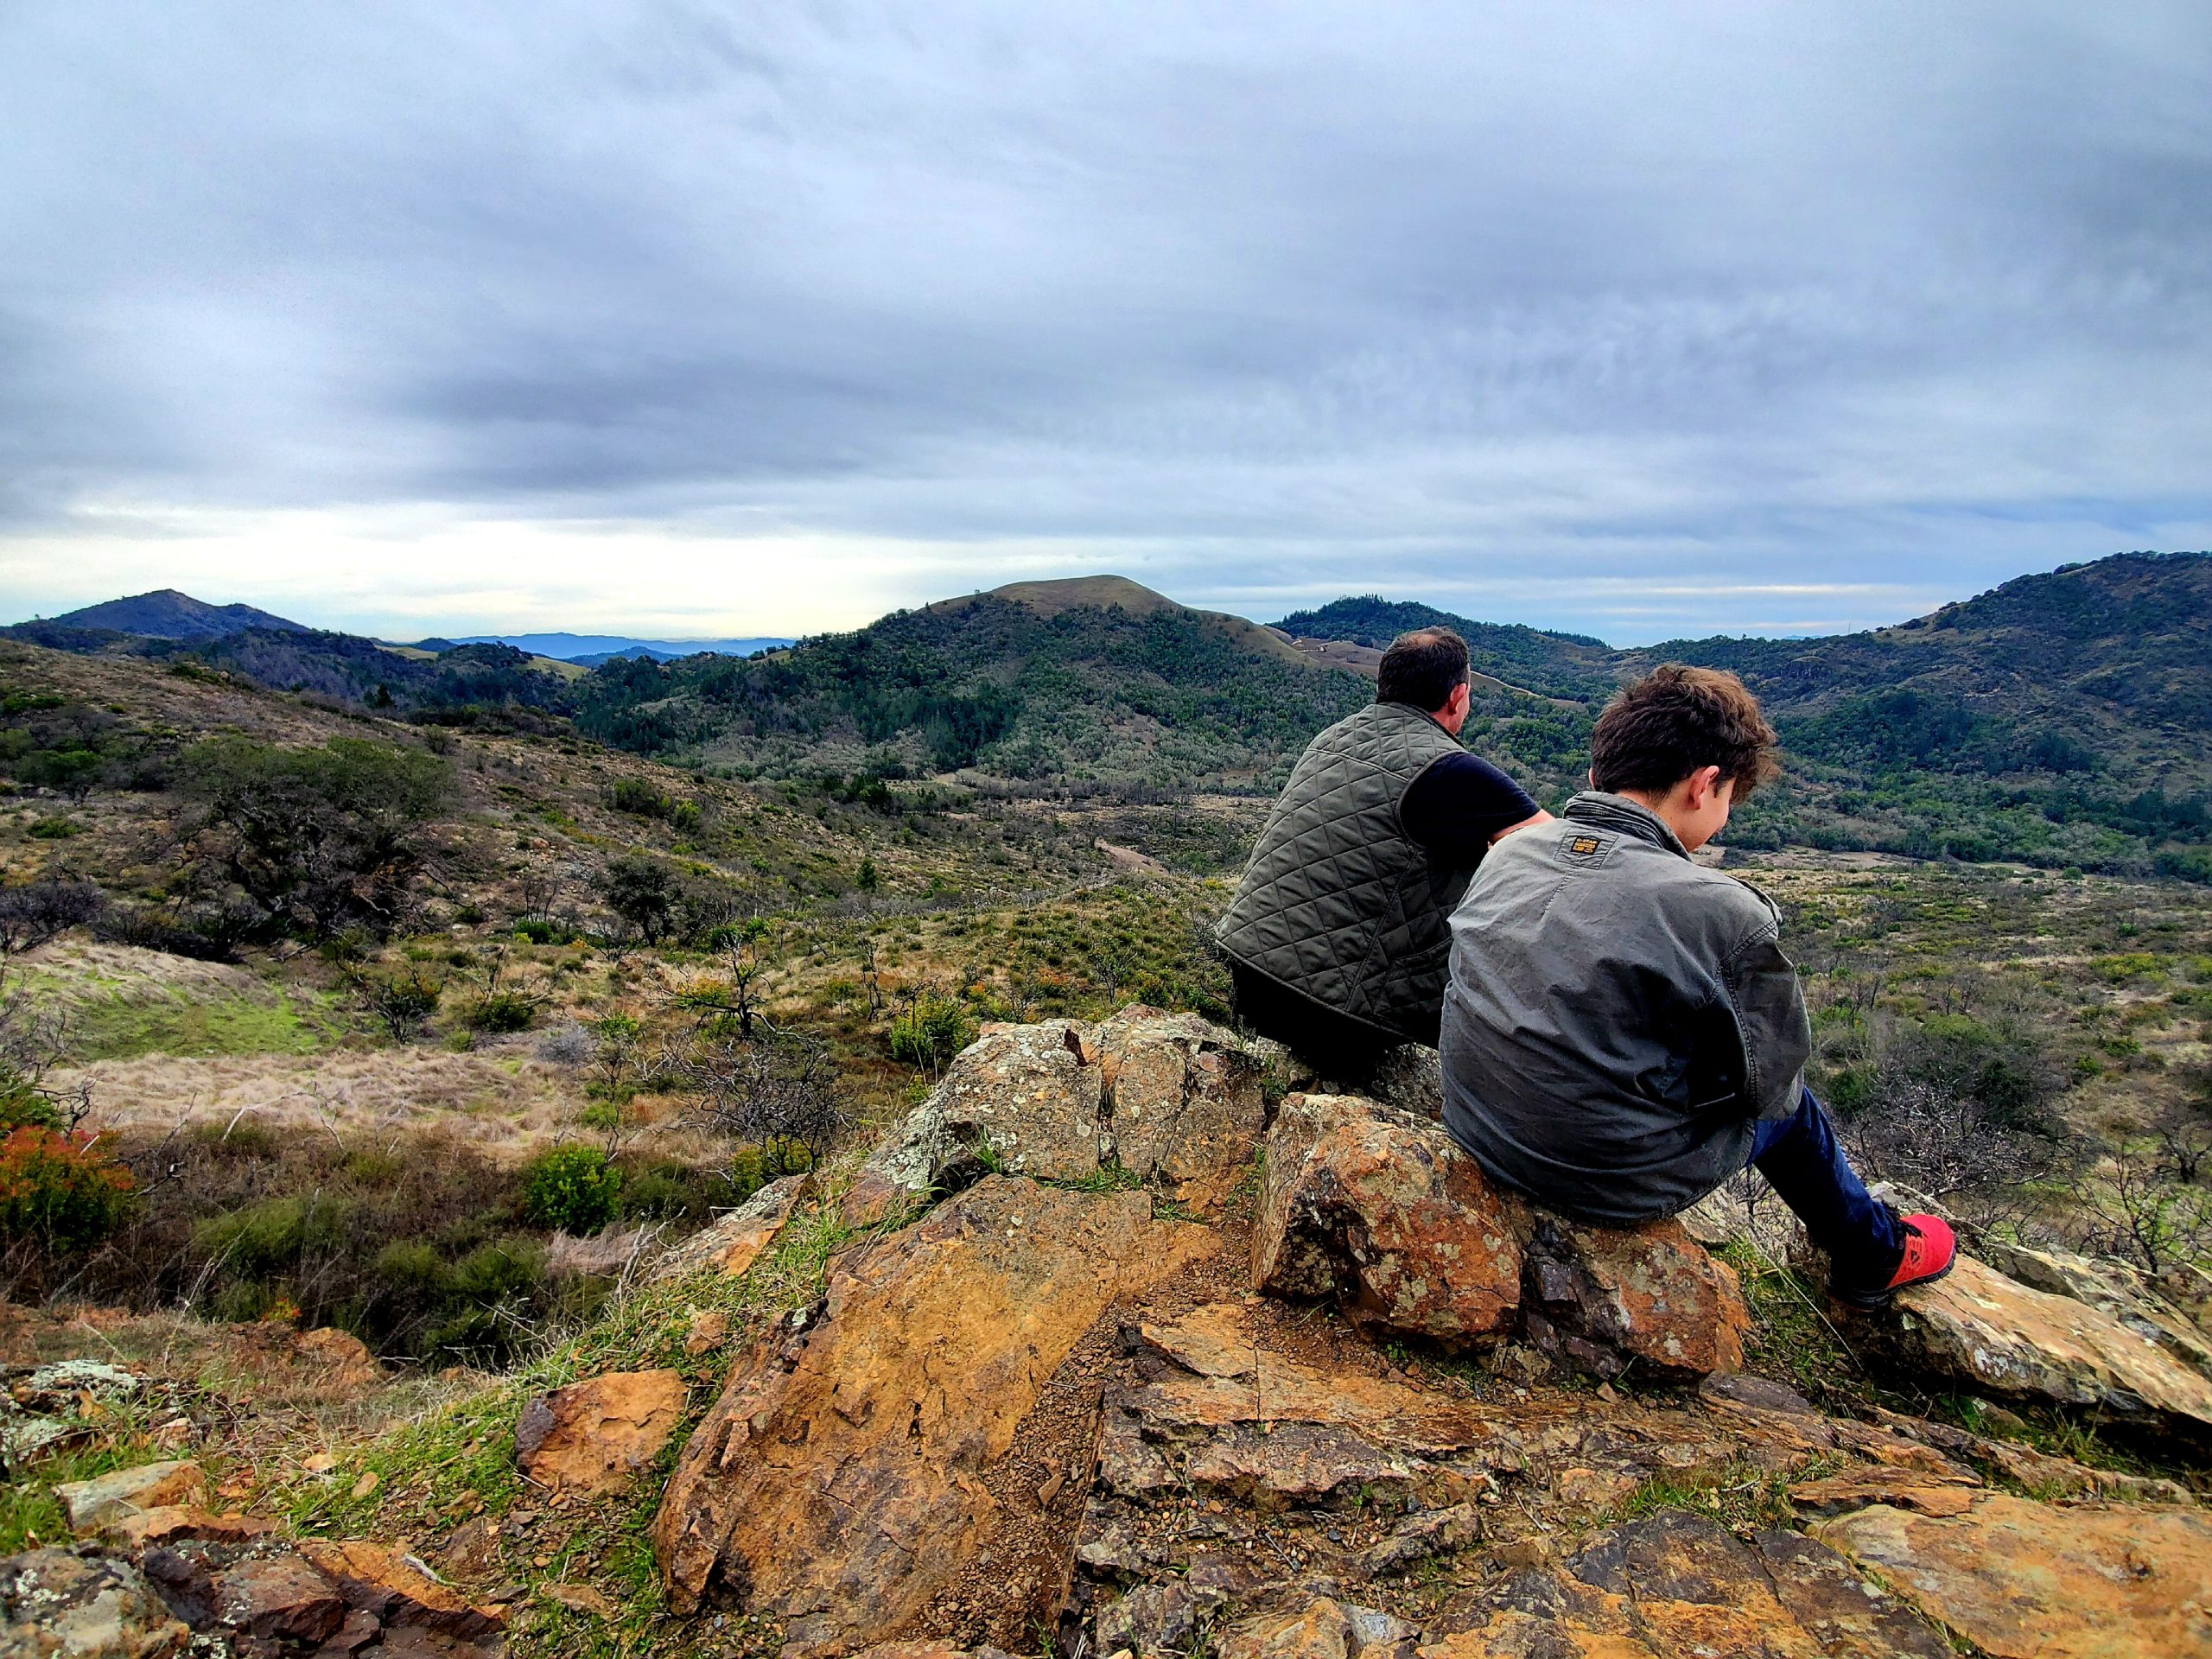 Man and his son with backs to camera sitting on rocks looking out on a mountain vista